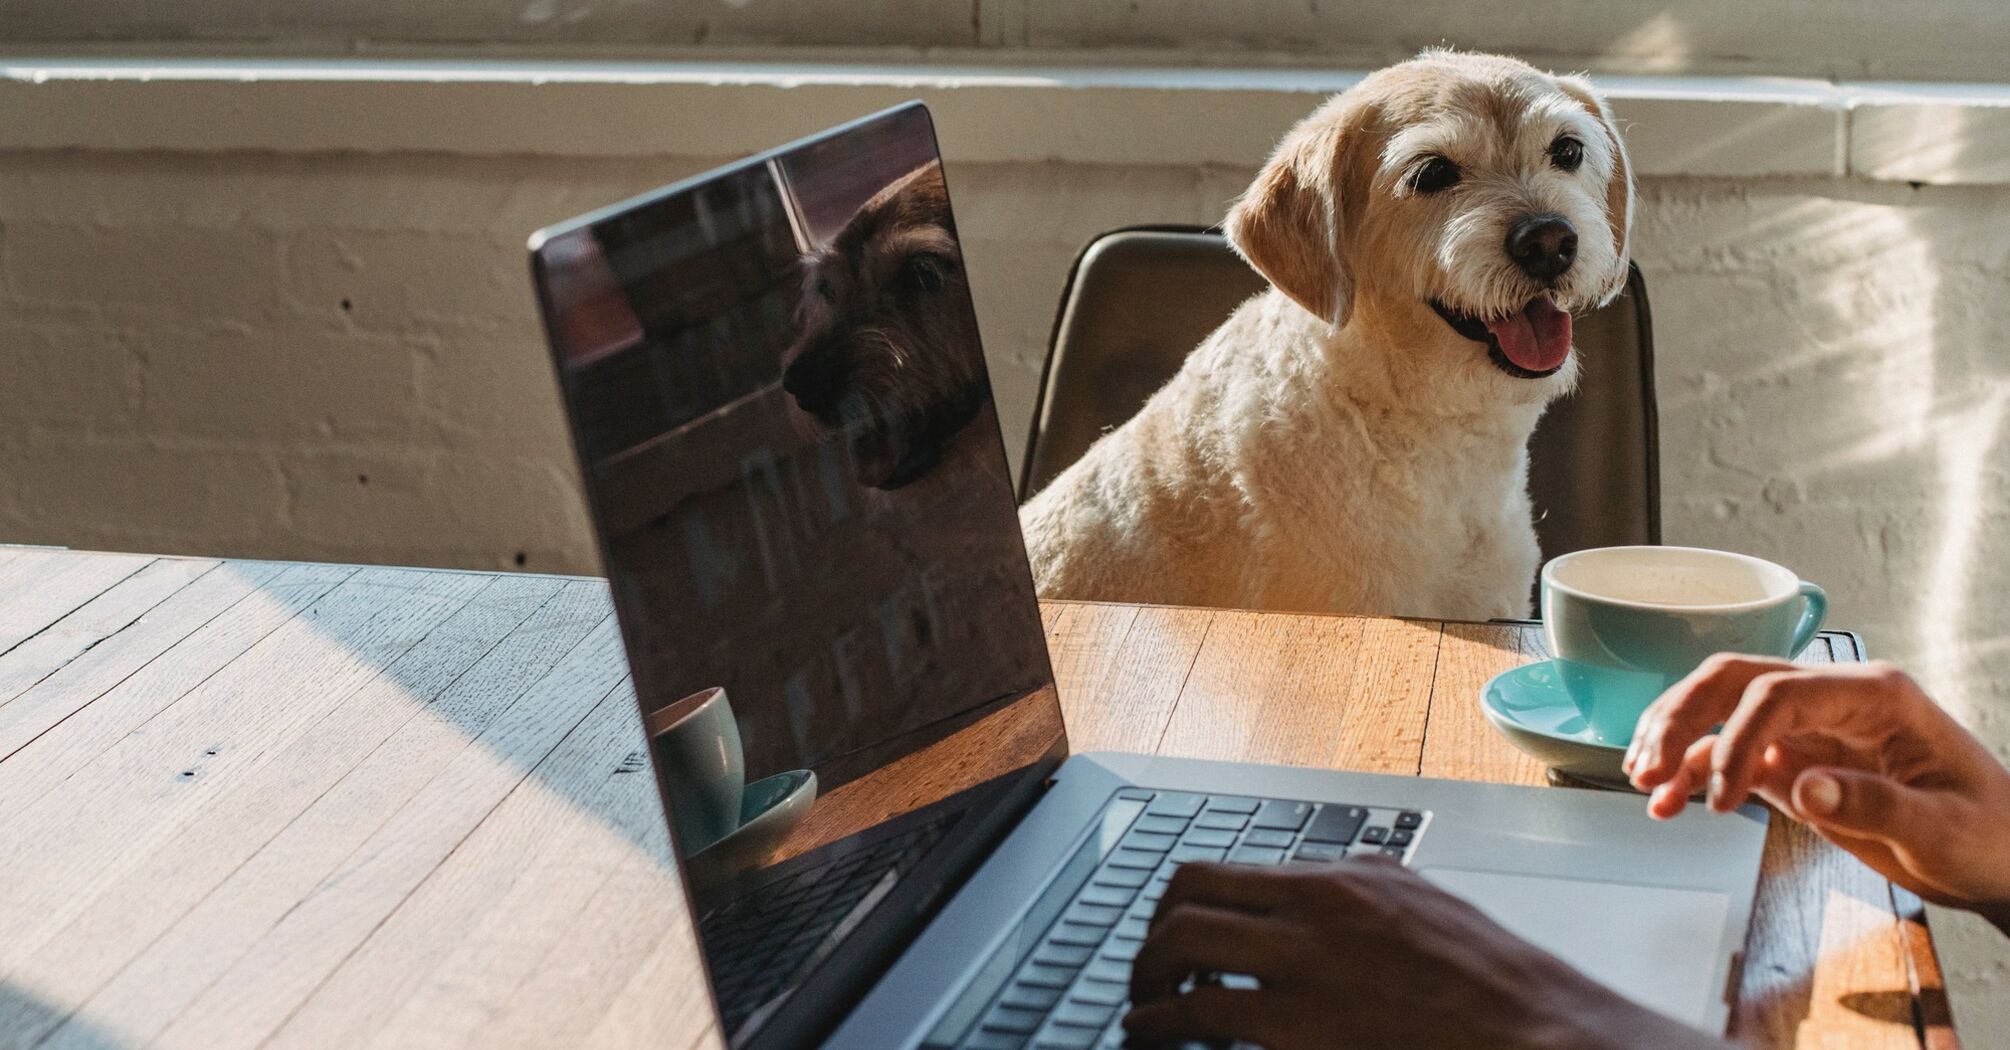 Should you take your dog to work in the office? All the pros and cons